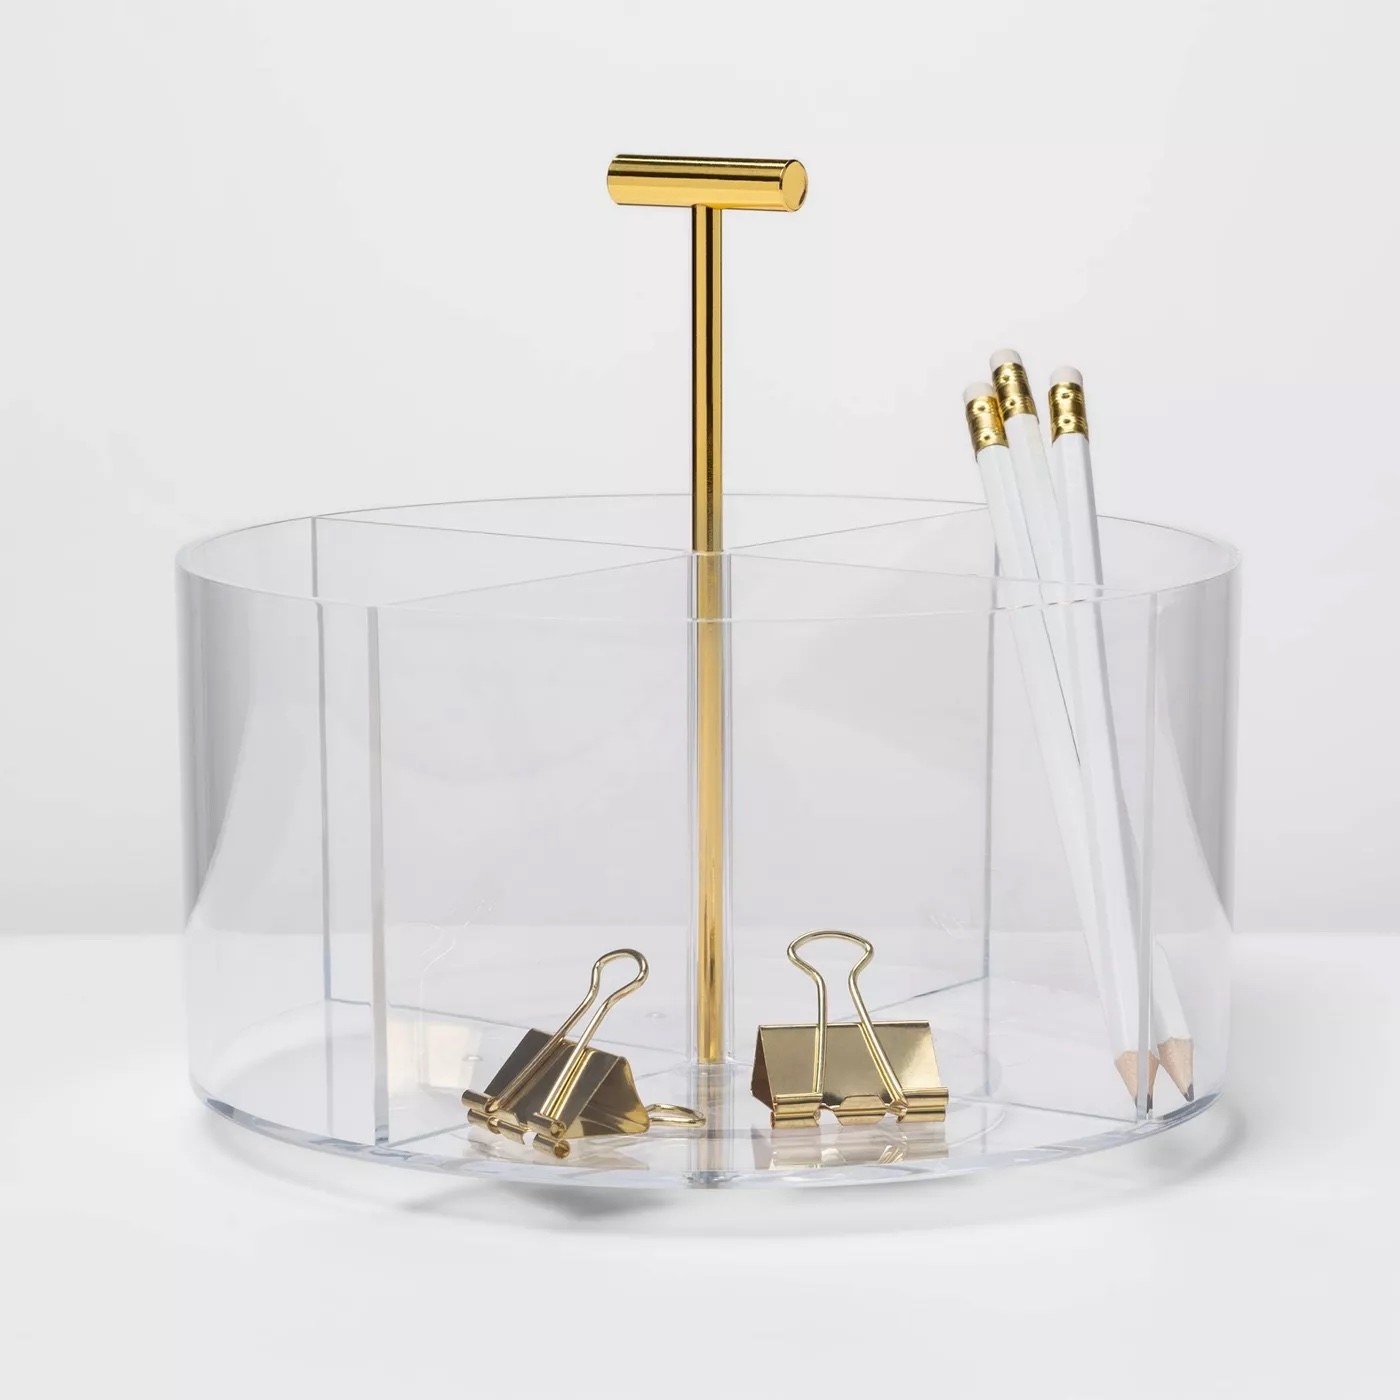 A clear round desktop organizer with gold and white pencils and gold paperclips.